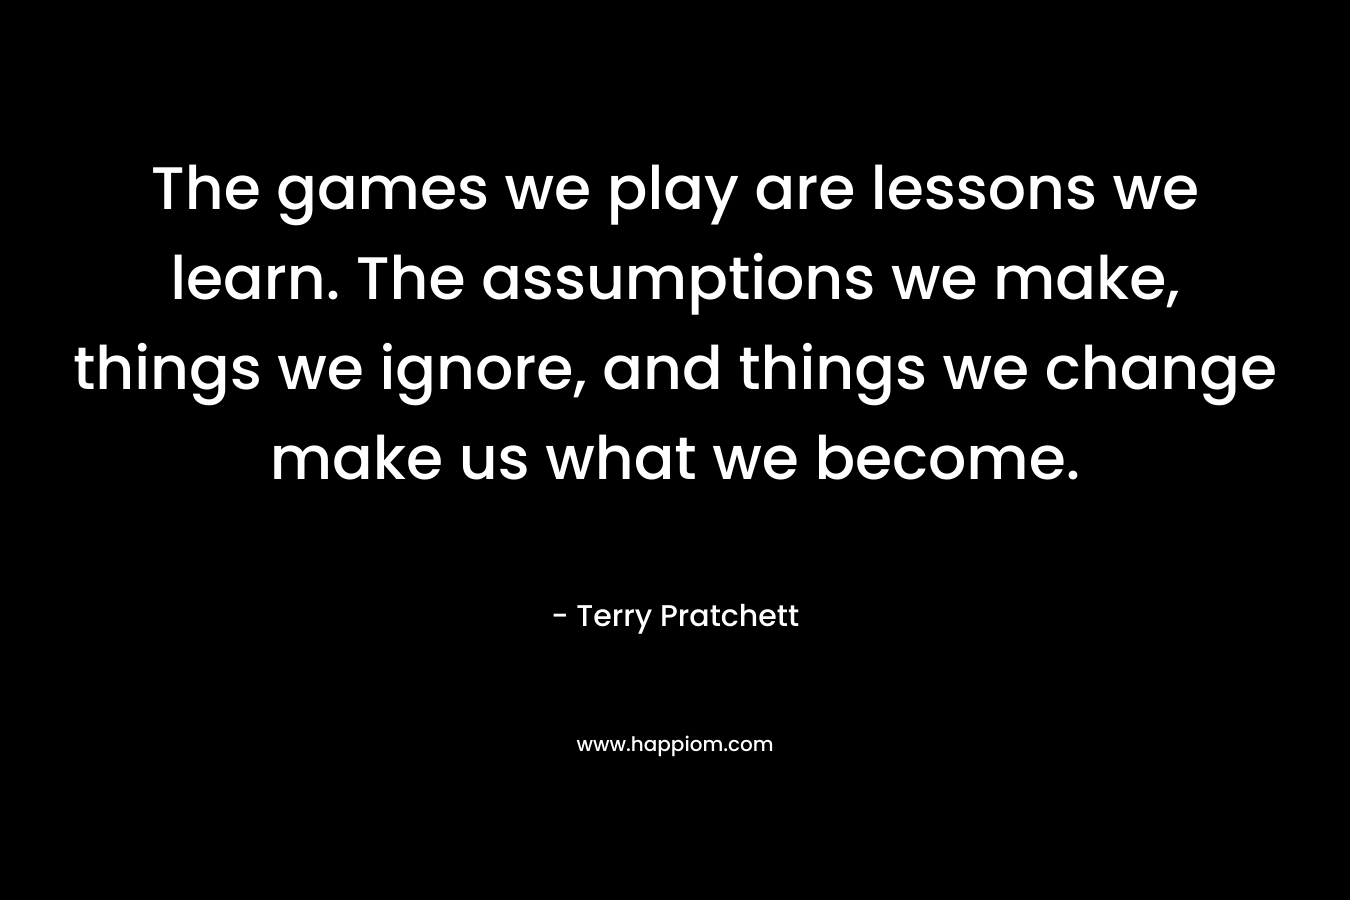 The games we play are lessons we learn. The assumptions we make, things we ignore, and things we change make us what we become.